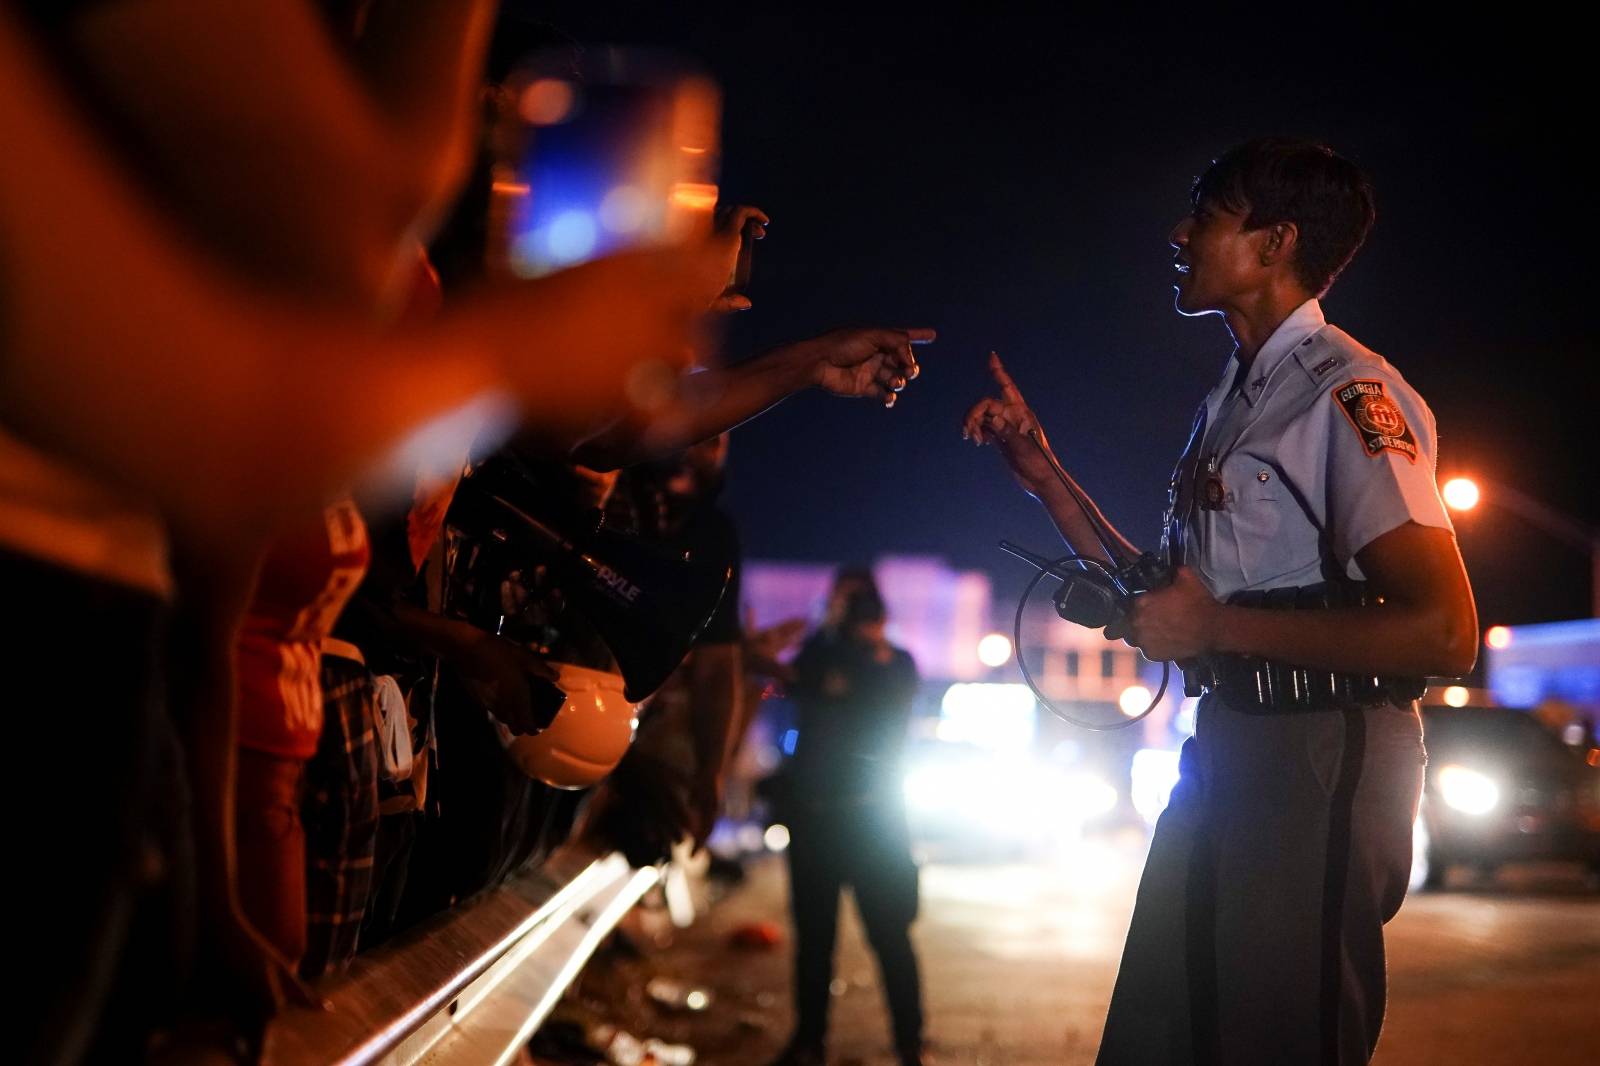 Protesters film an interaction with a Georgia State Patrol officer during a rally against racial inequality and the police shooting death of Rayshard Brooks, in Atlanta